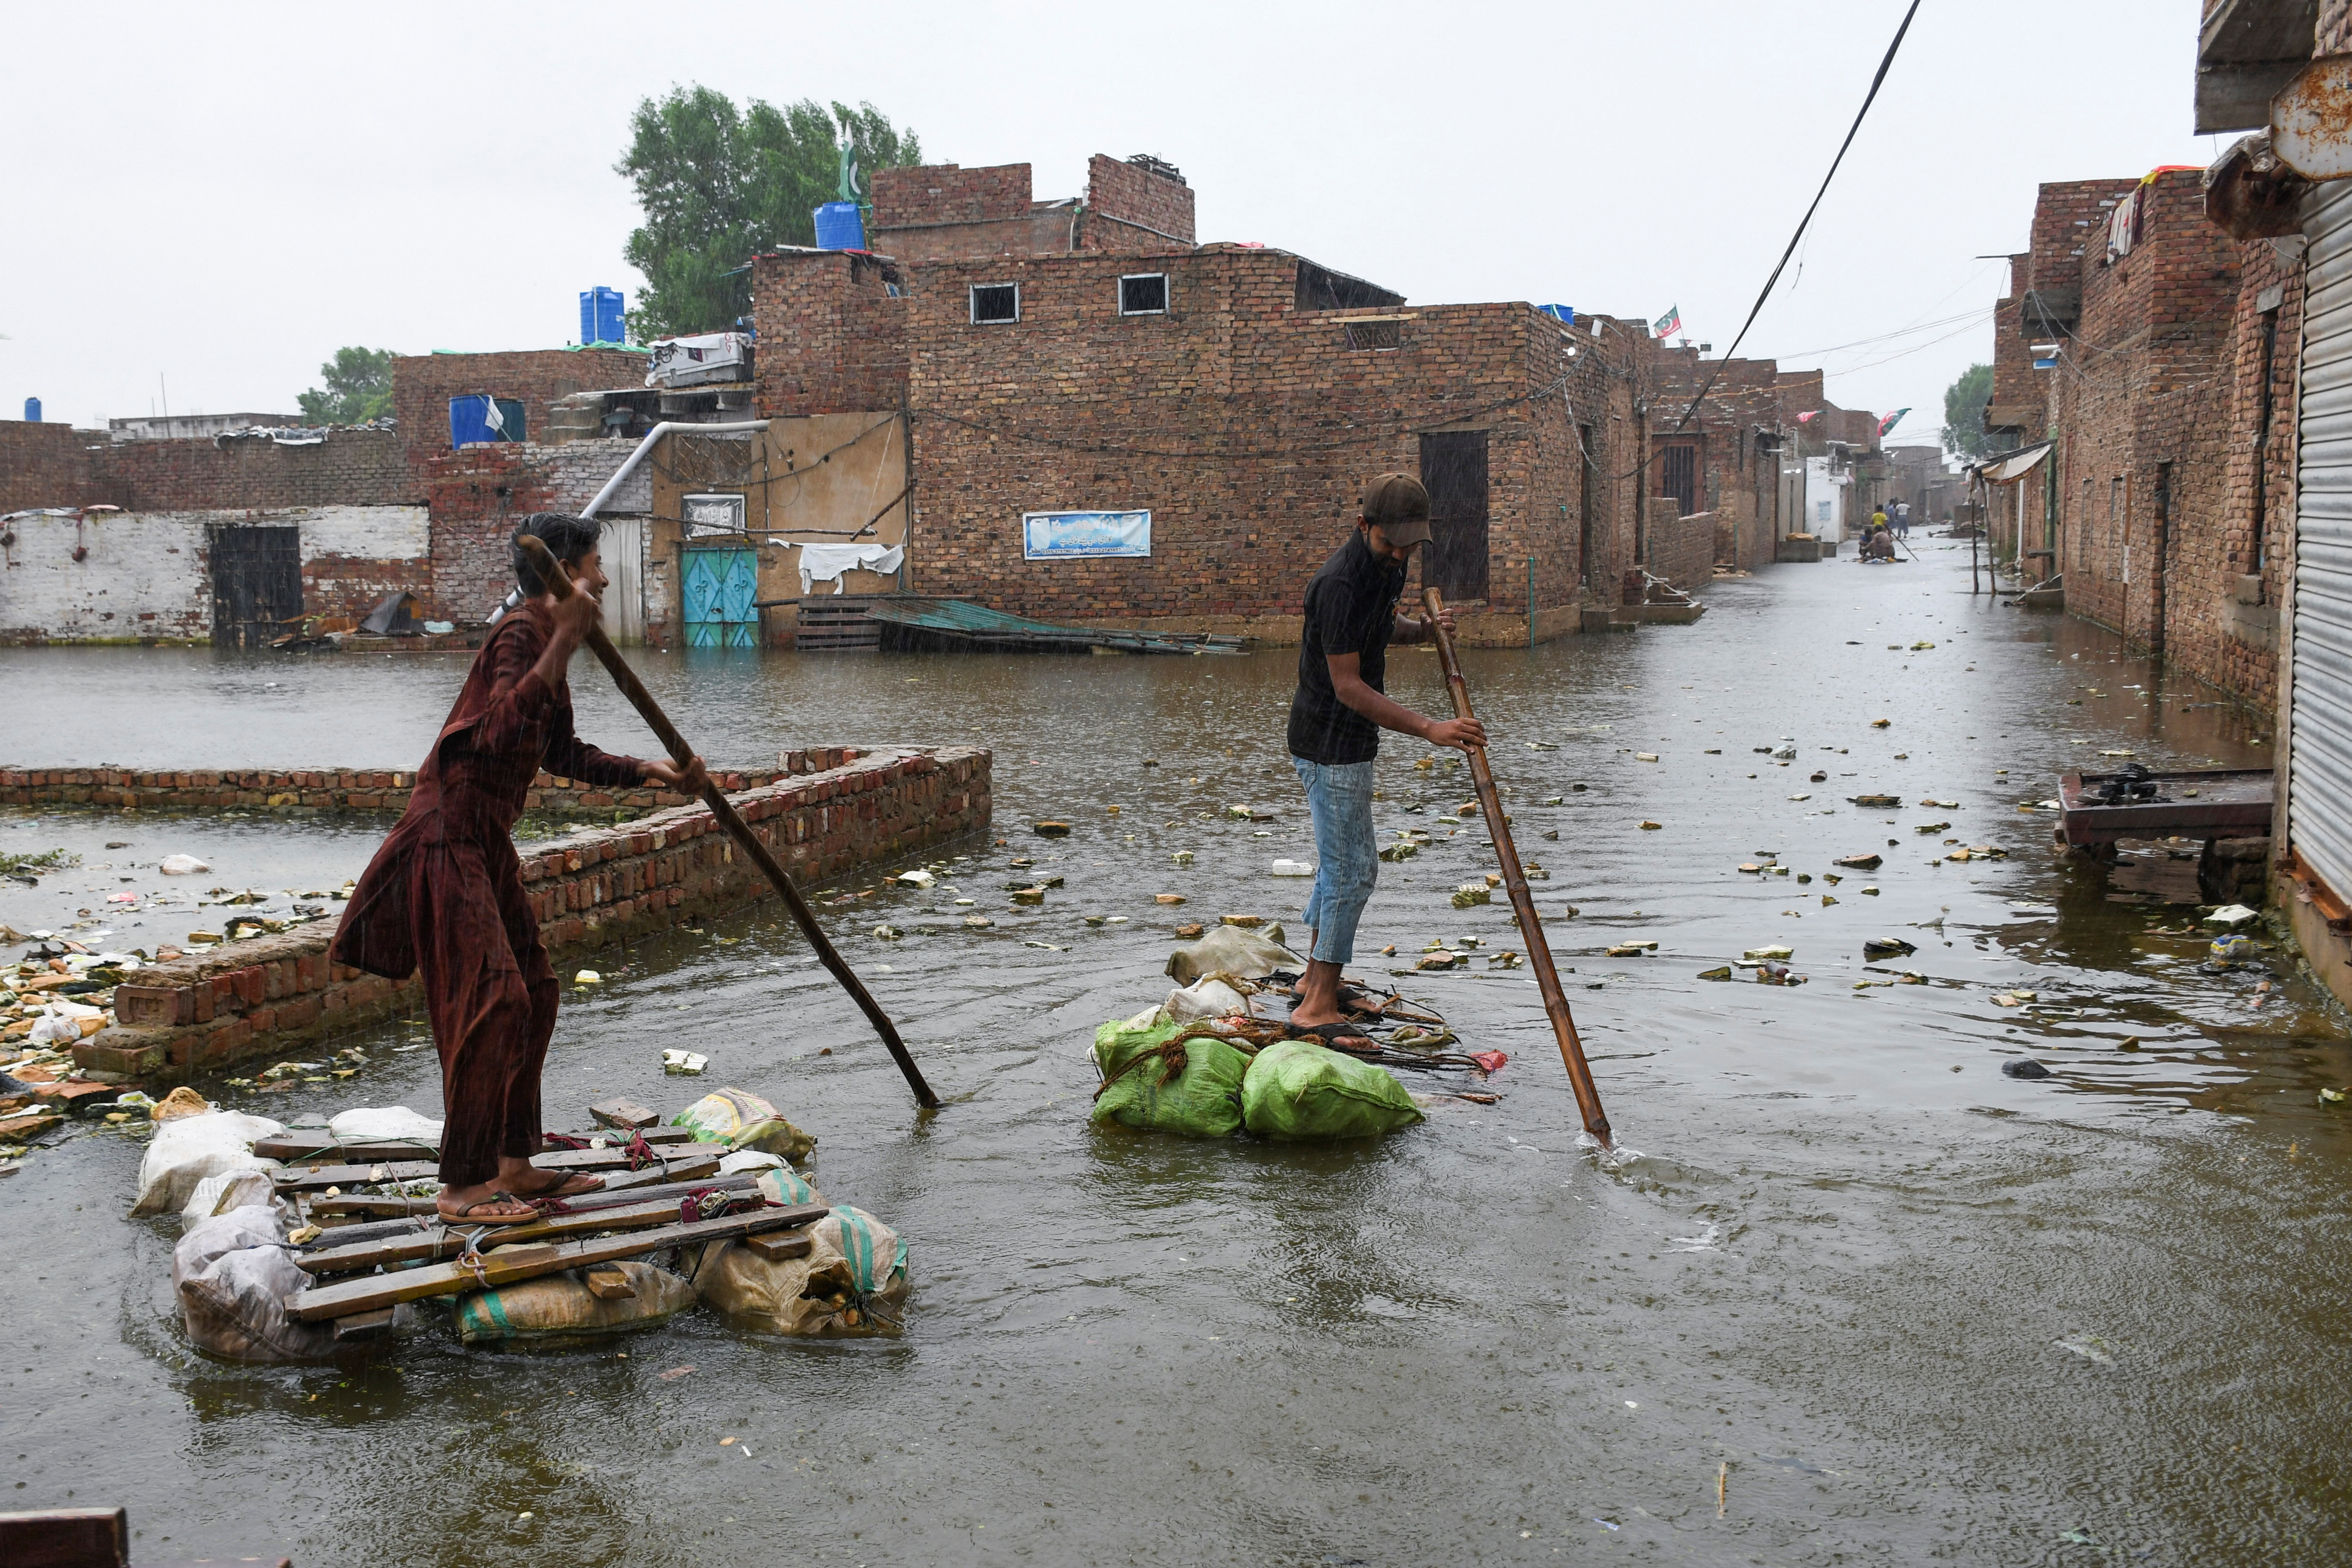 Men paddle on makeshift rafts as they cross a flooded street, amidst rainfall during the monsoon season in Hyderabad